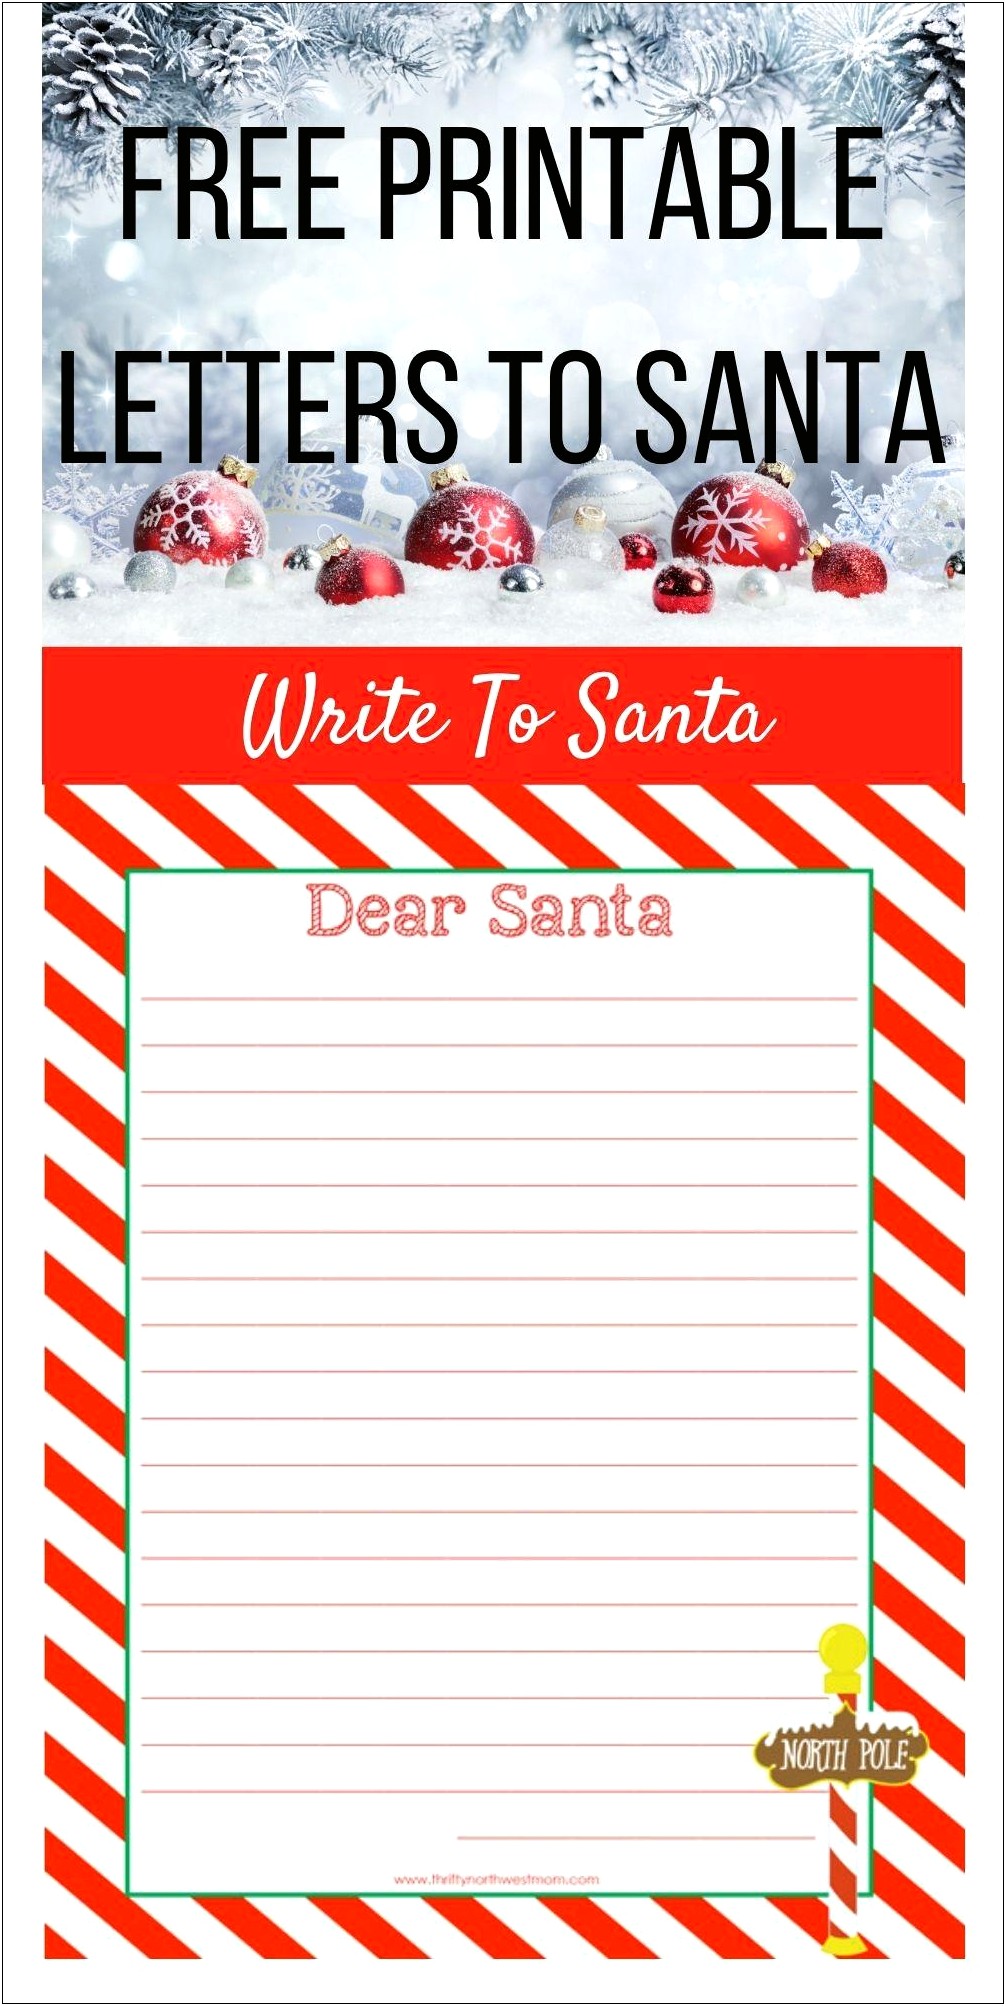 free-letter-to-santa-printable-template-templates-resume-designs